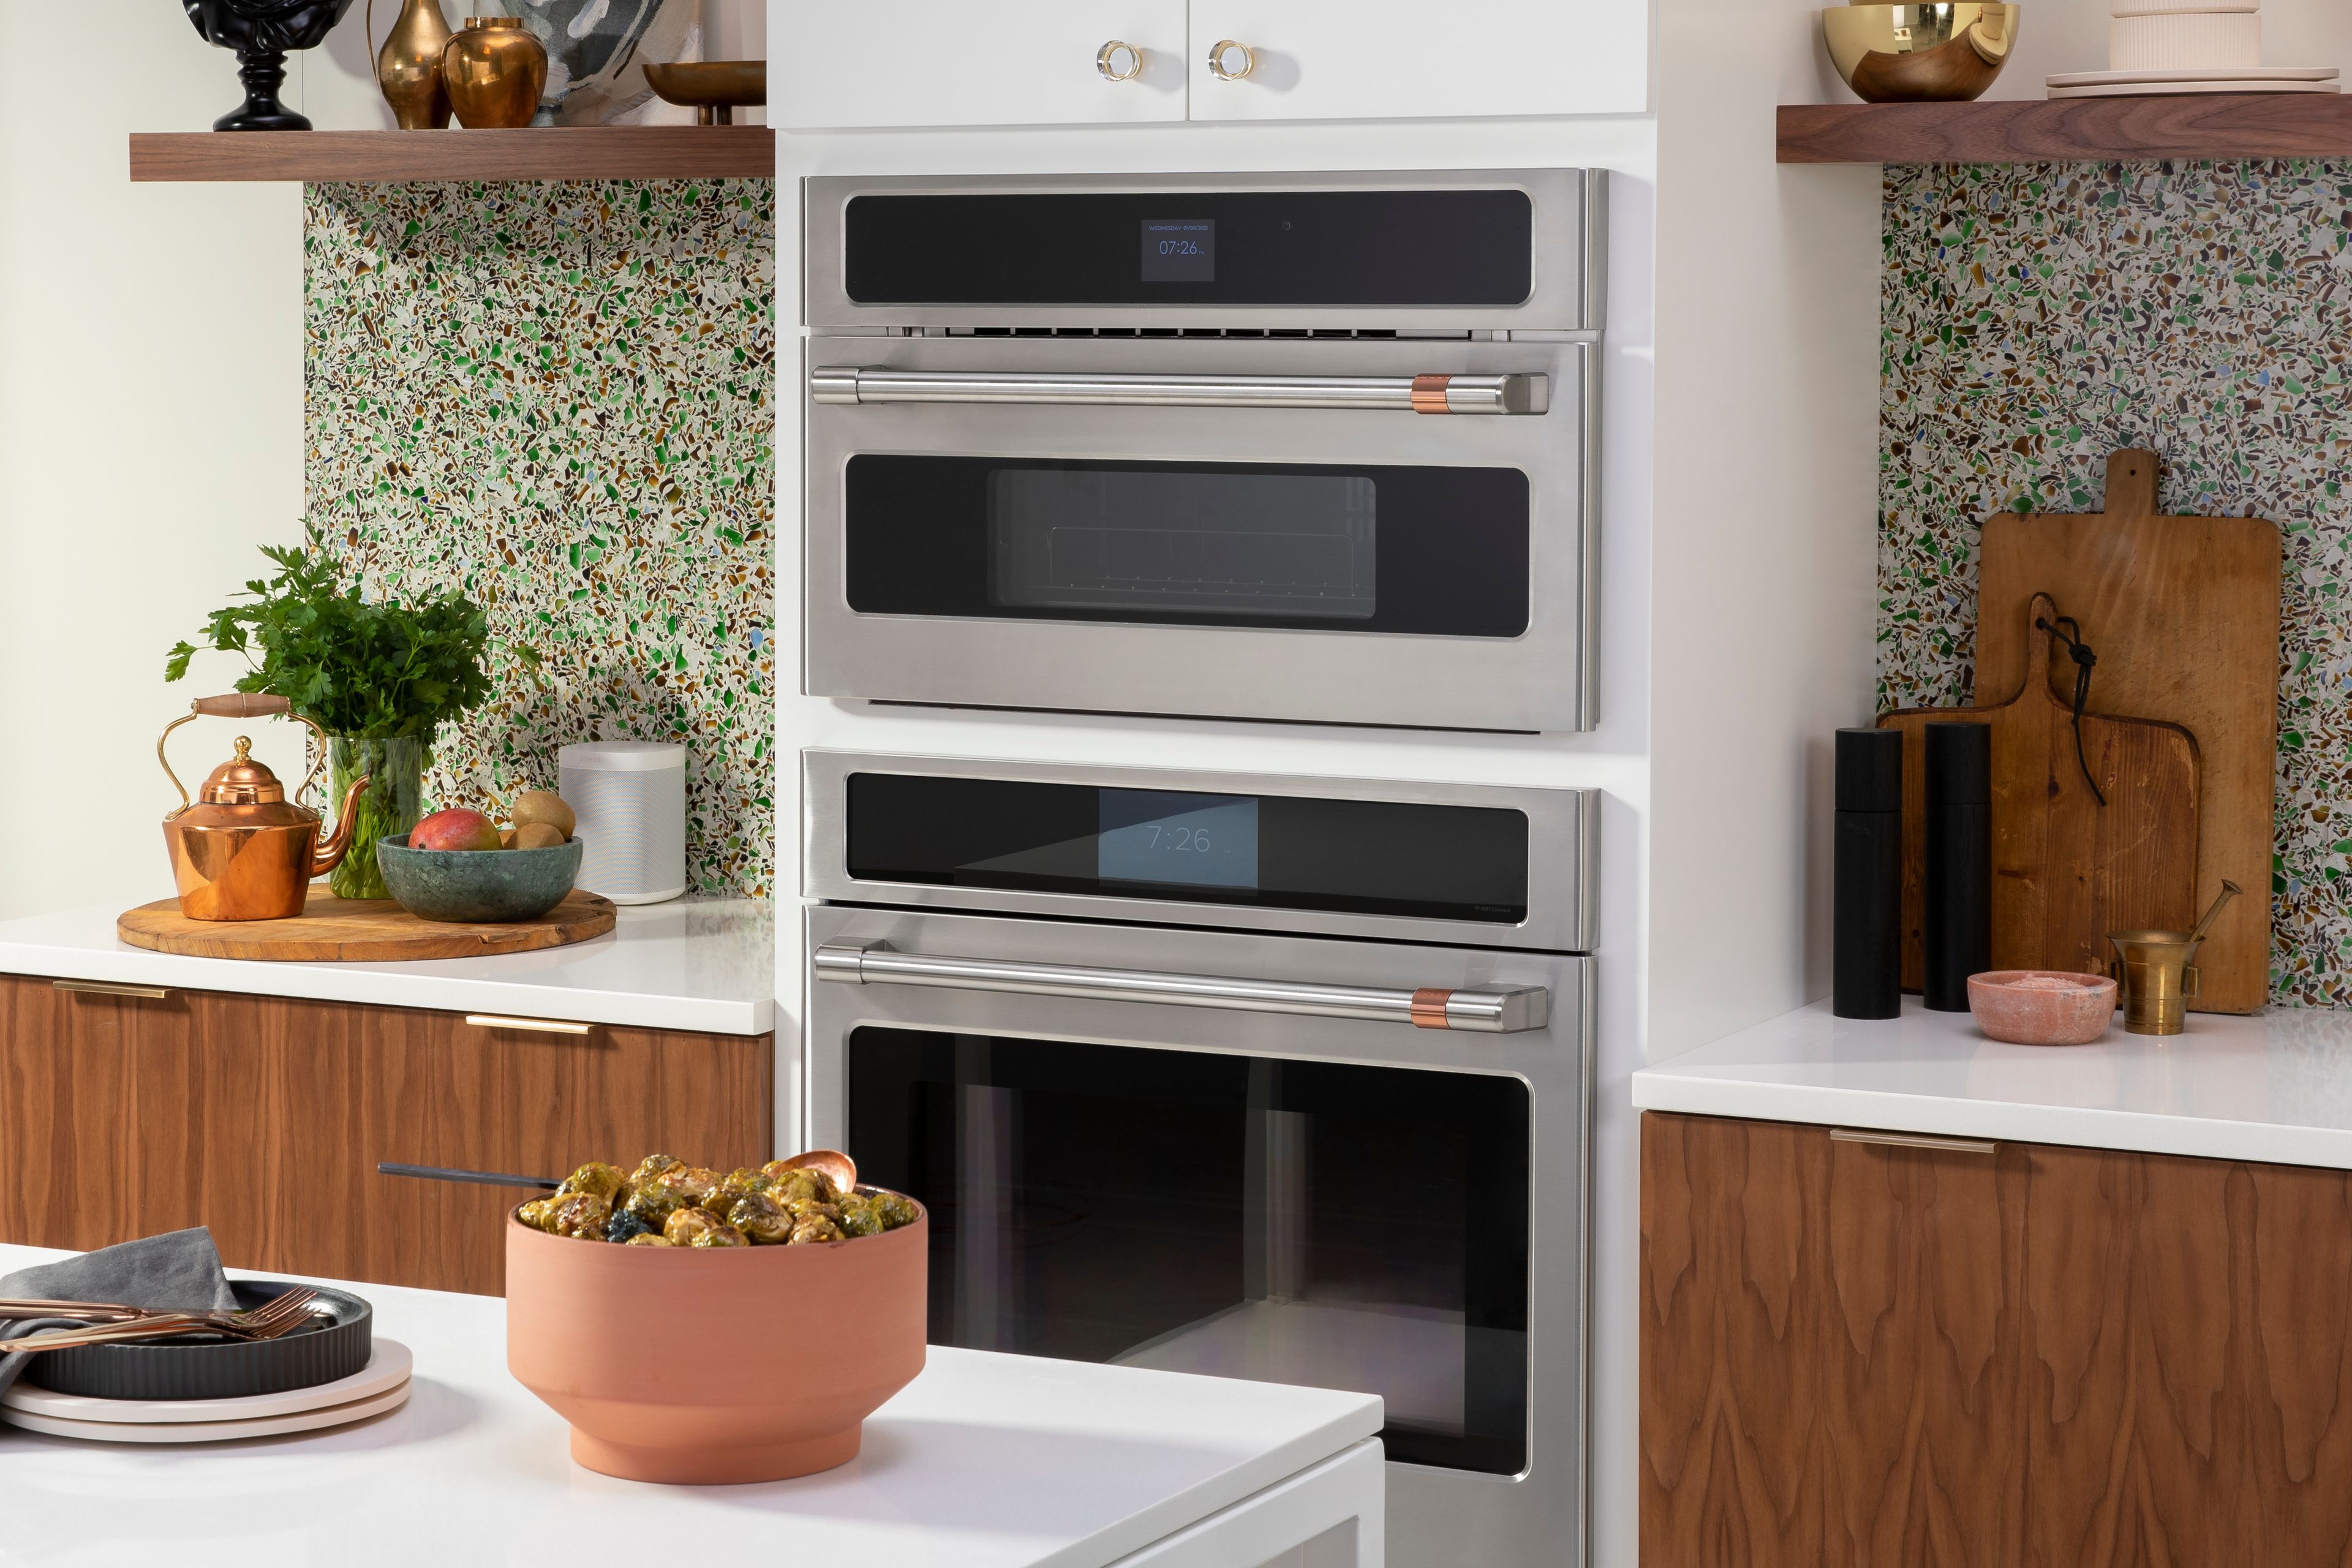 What's the Difference between a Convection Oven and a Conventional Oven?